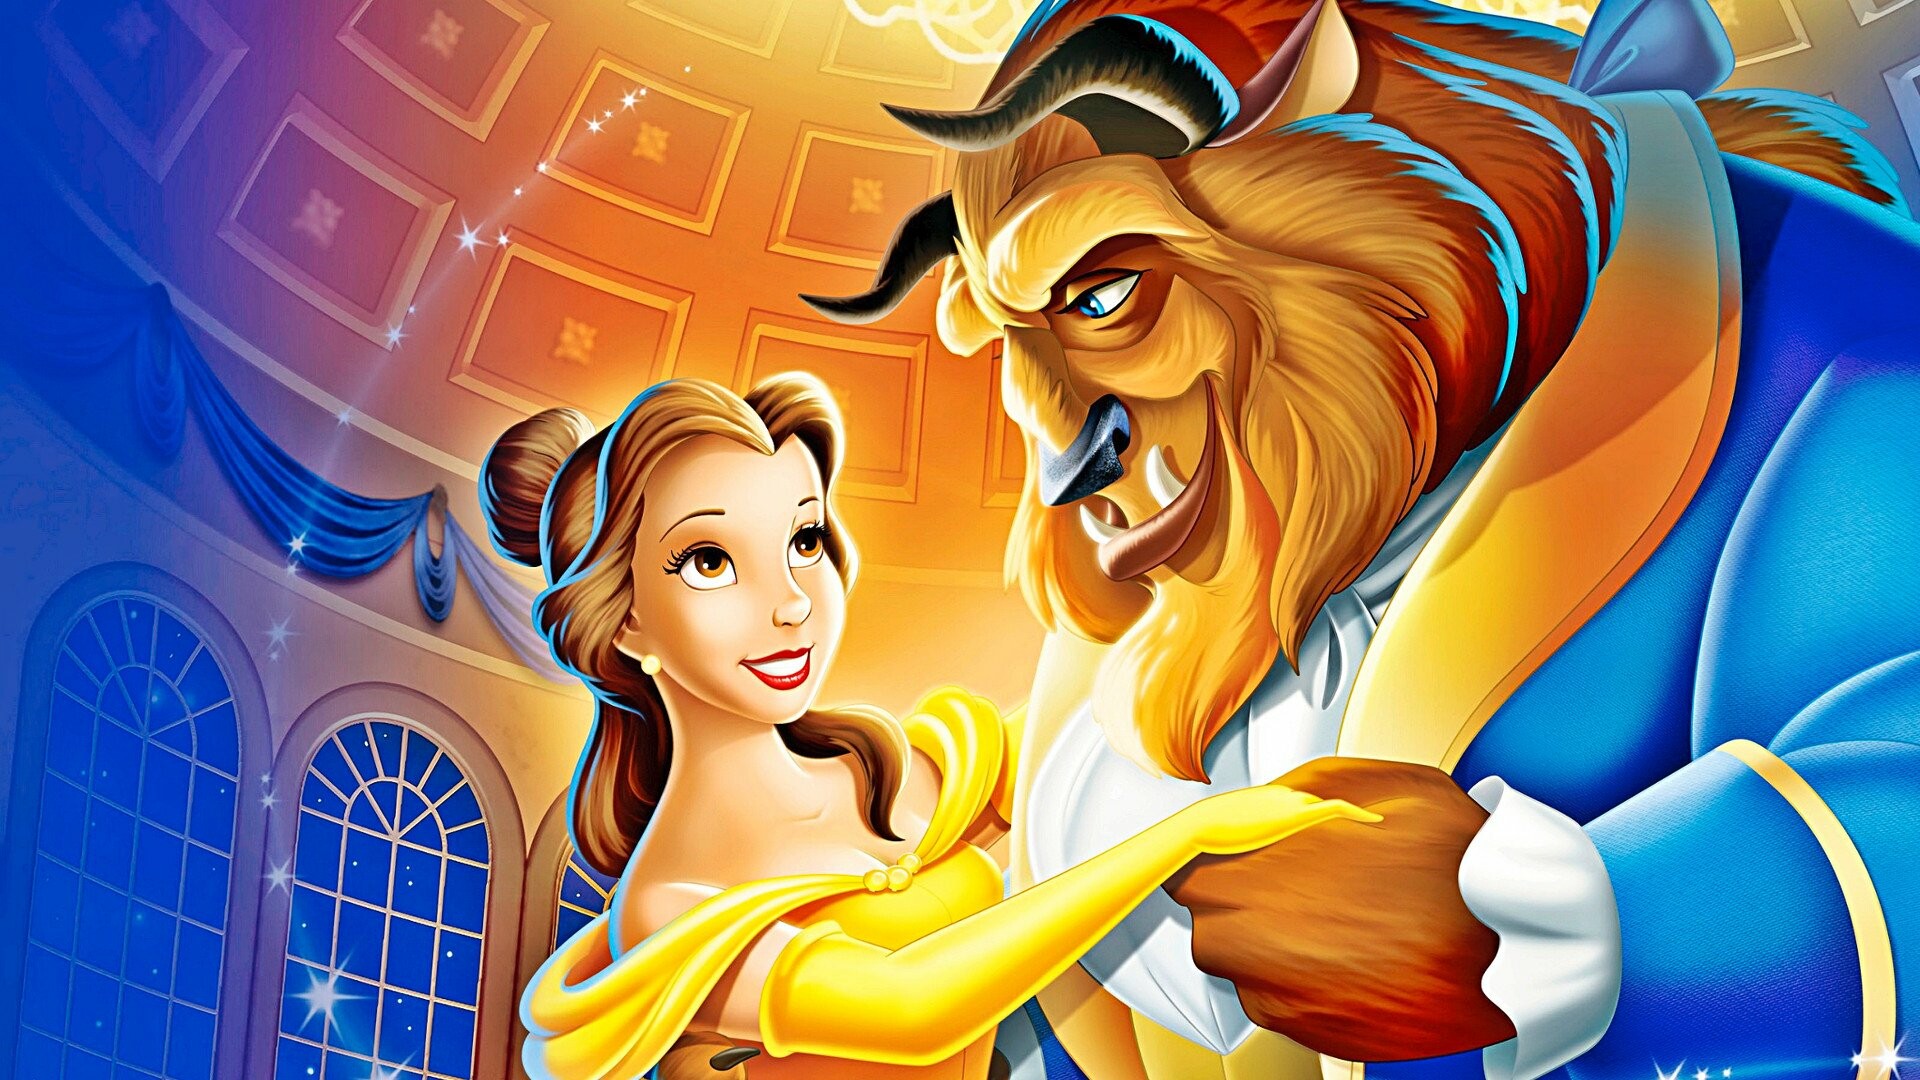 Beauty and the Beast: A 1991 American animated musical romantic fantasy film, Disney. 1920x1080 Full HD Wallpaper.